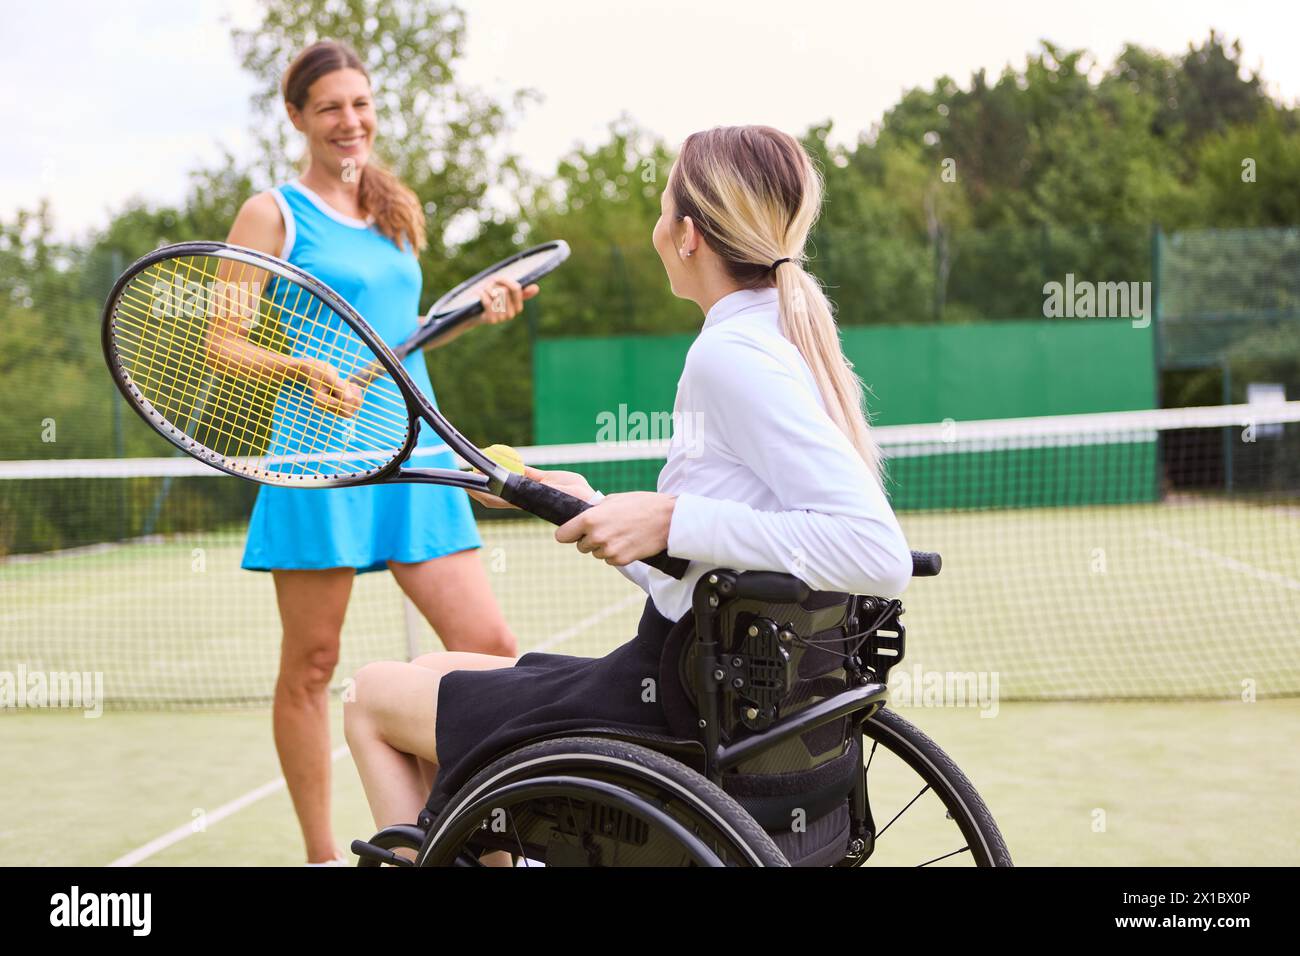 Two people enjoying a game of tennis, one person who uses a wheelchair showing active lifestyle and inclusion on an outdoor court. Stock Photo